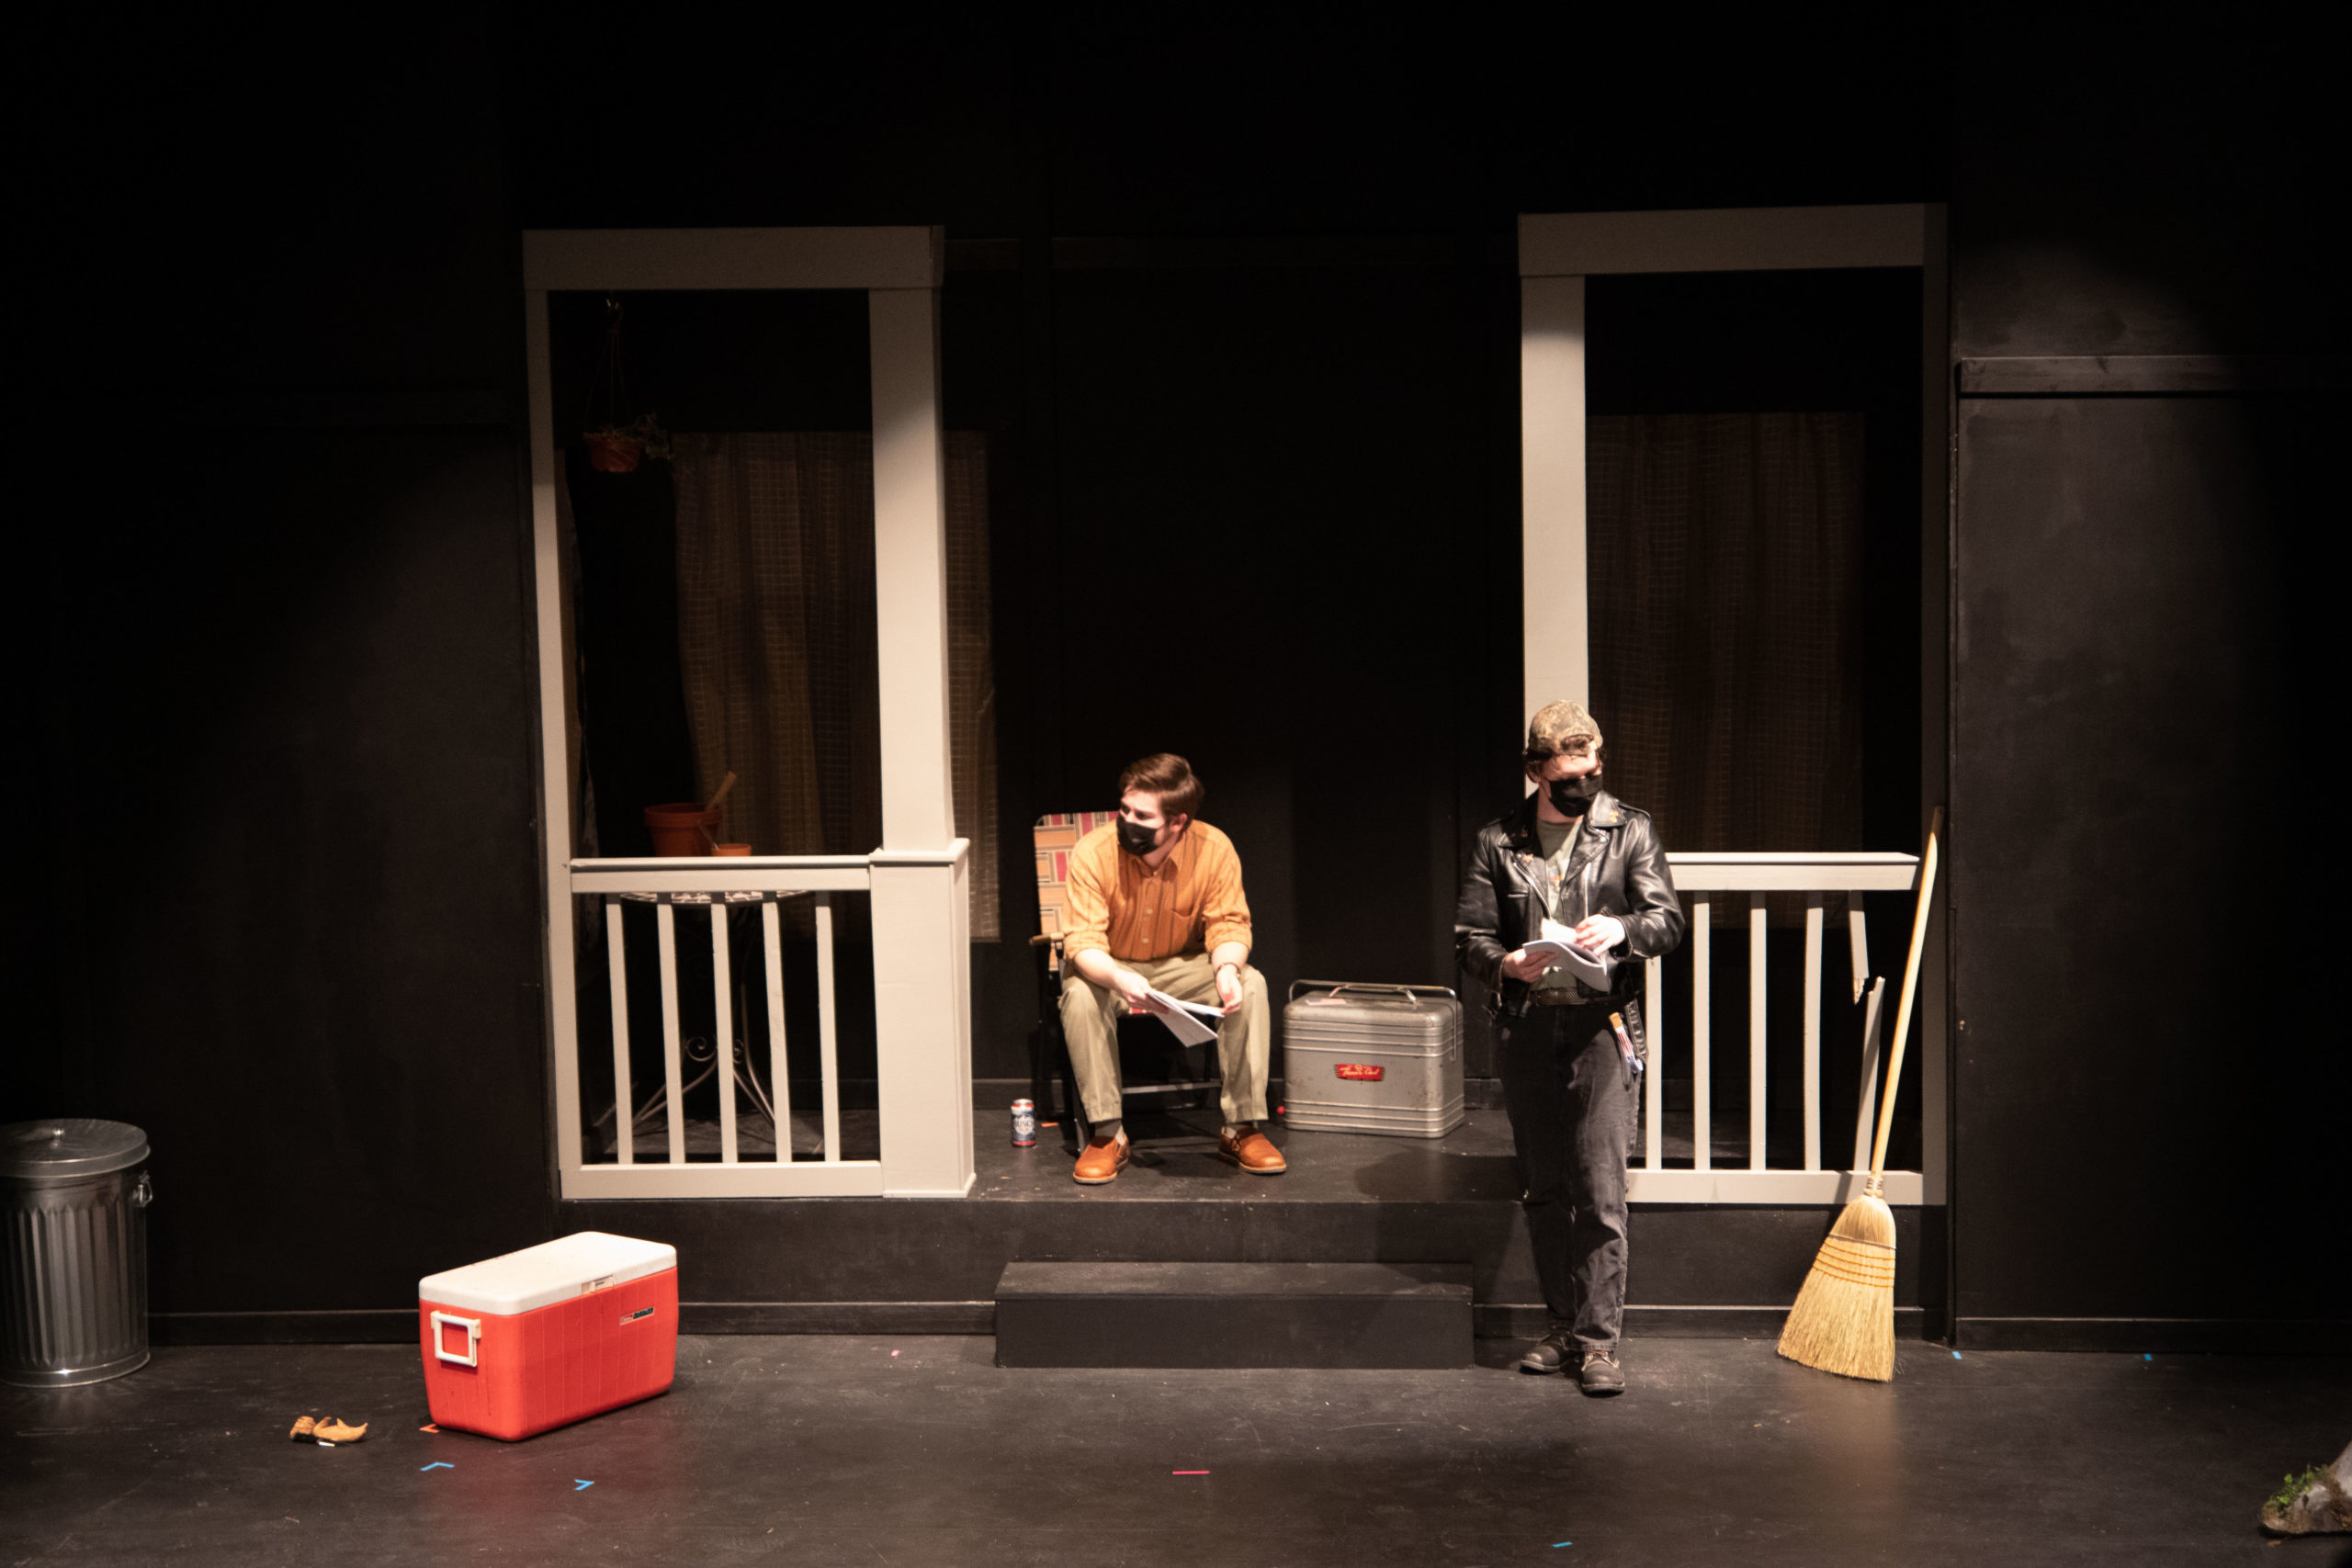 Black box stage with a house as the set, young white man sits on a chair on the porch and another young person stands near the steps